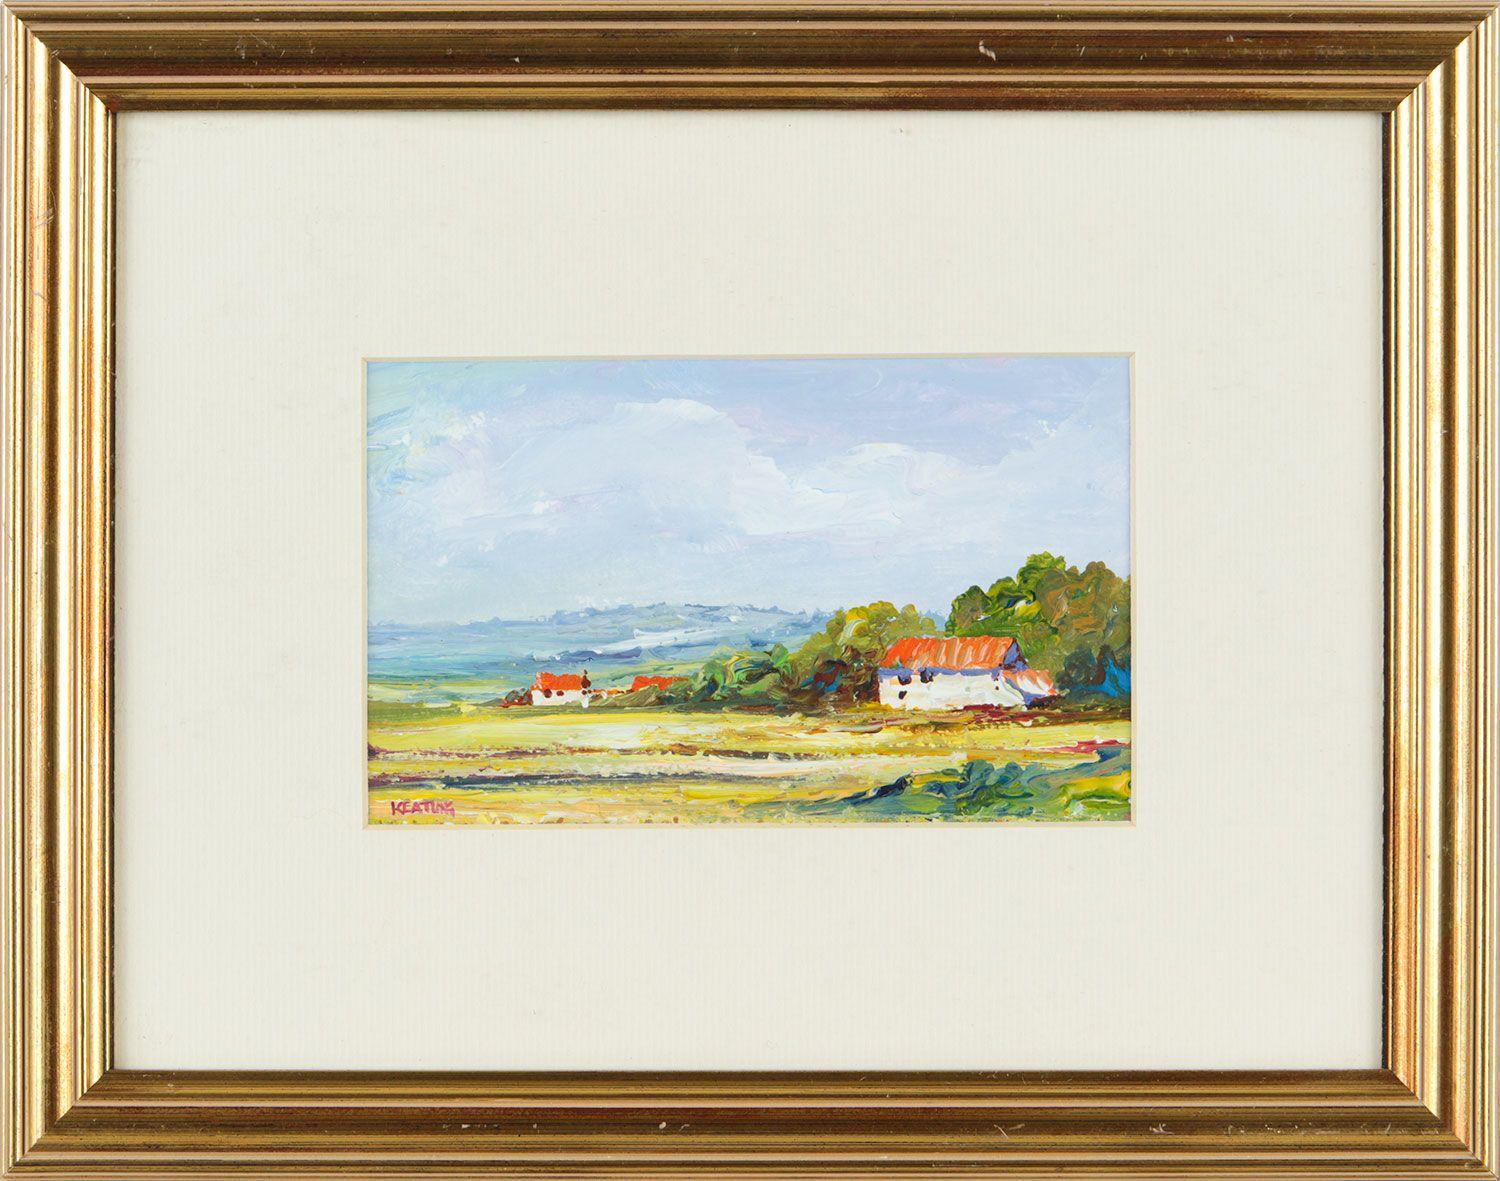 Mediterranean Cottages with Red Roof Tiles in Rural European Countryside by Irish Artist 

Art measures 7 x 4 inches 
Frame measures 13.5 x 10.5 inches 

Impressionistic painting using oil on paper - mounted and framed 
Signed Keating 

